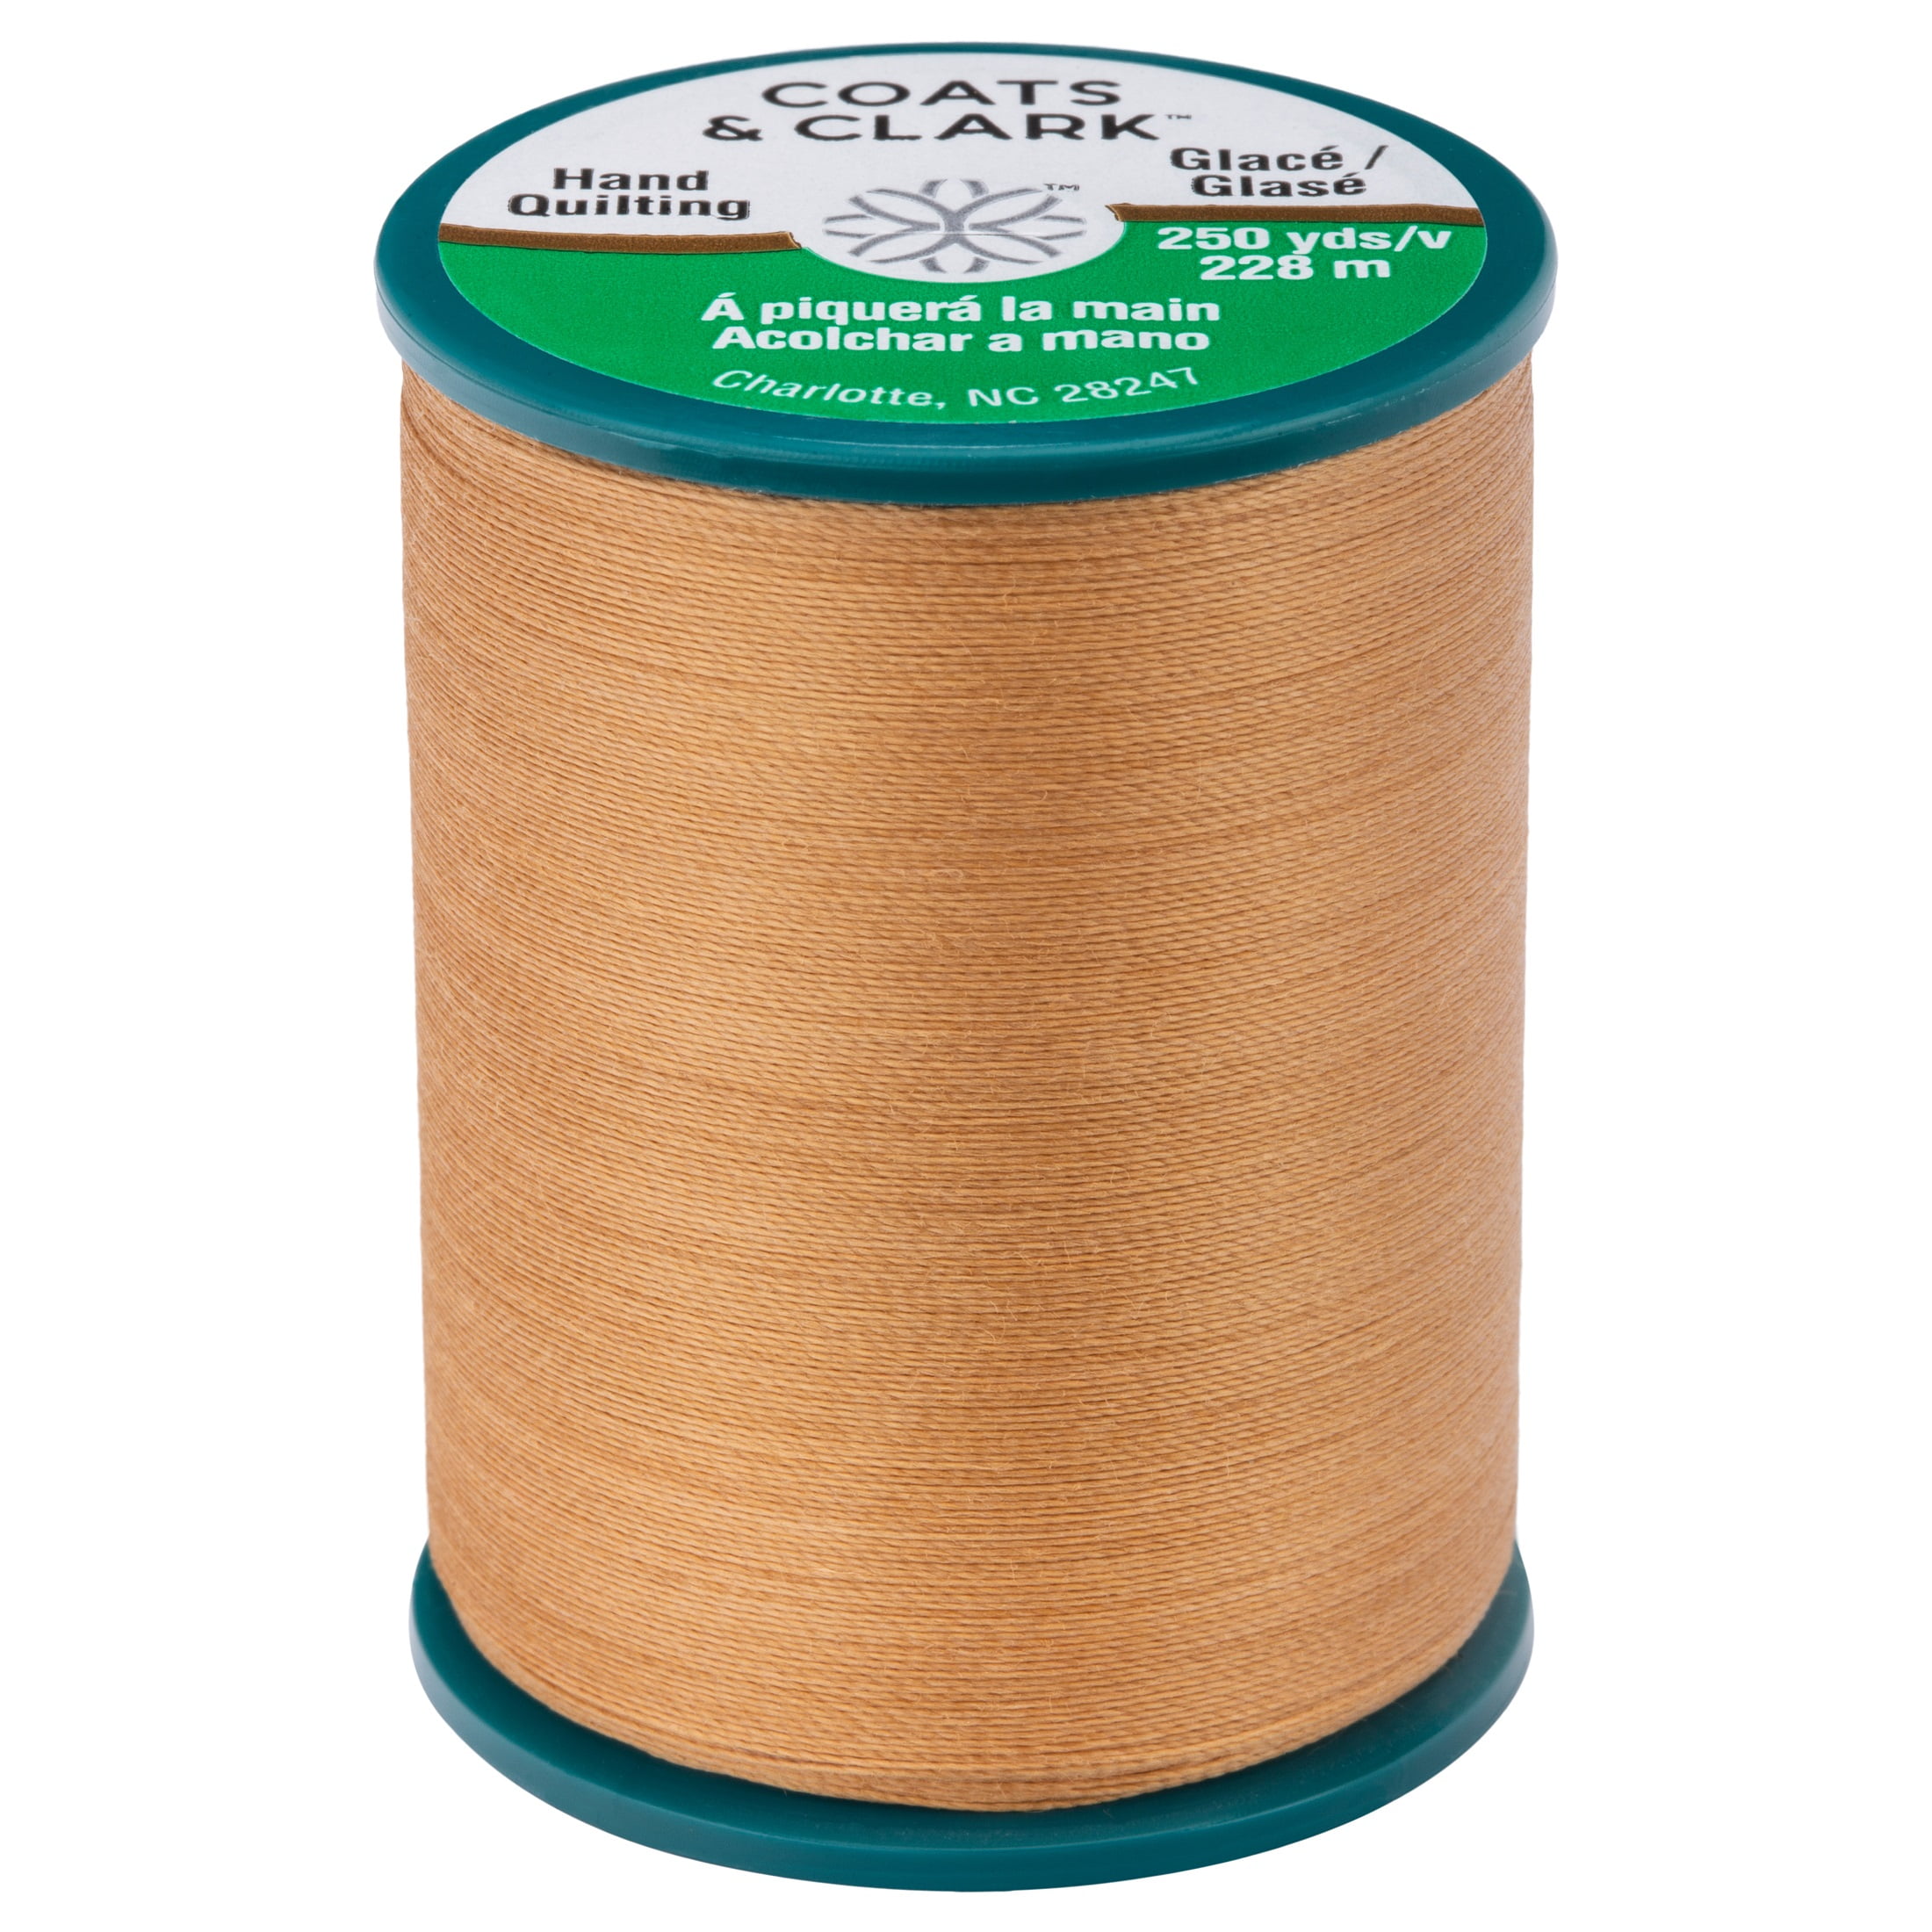 3 Pack Coats Dual Duty Plus Hand Quilting Thread 325yd-Dogwood S960-8530